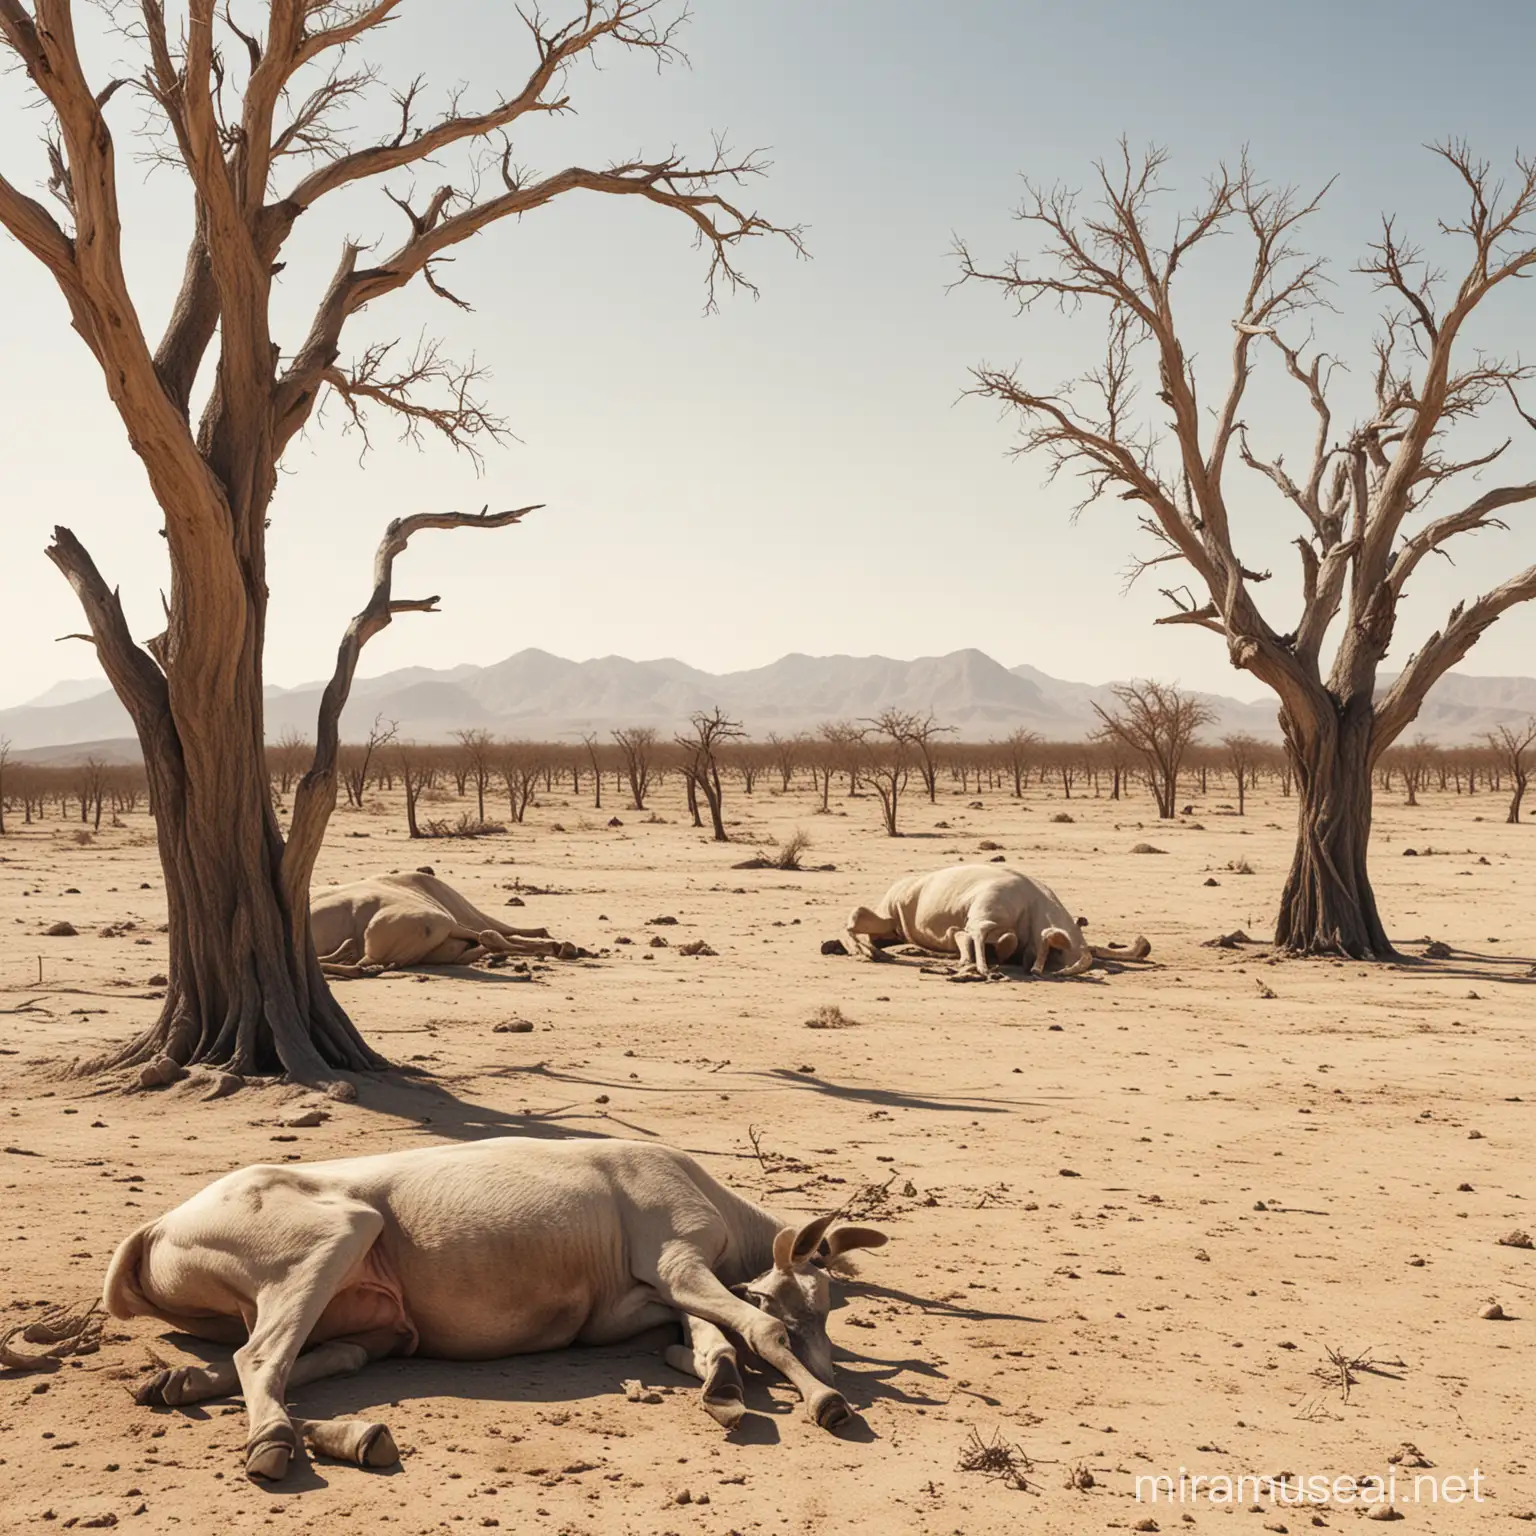 create images of dead livestock, dry trees, desert backgrounds, realistic, detailed, HD quality